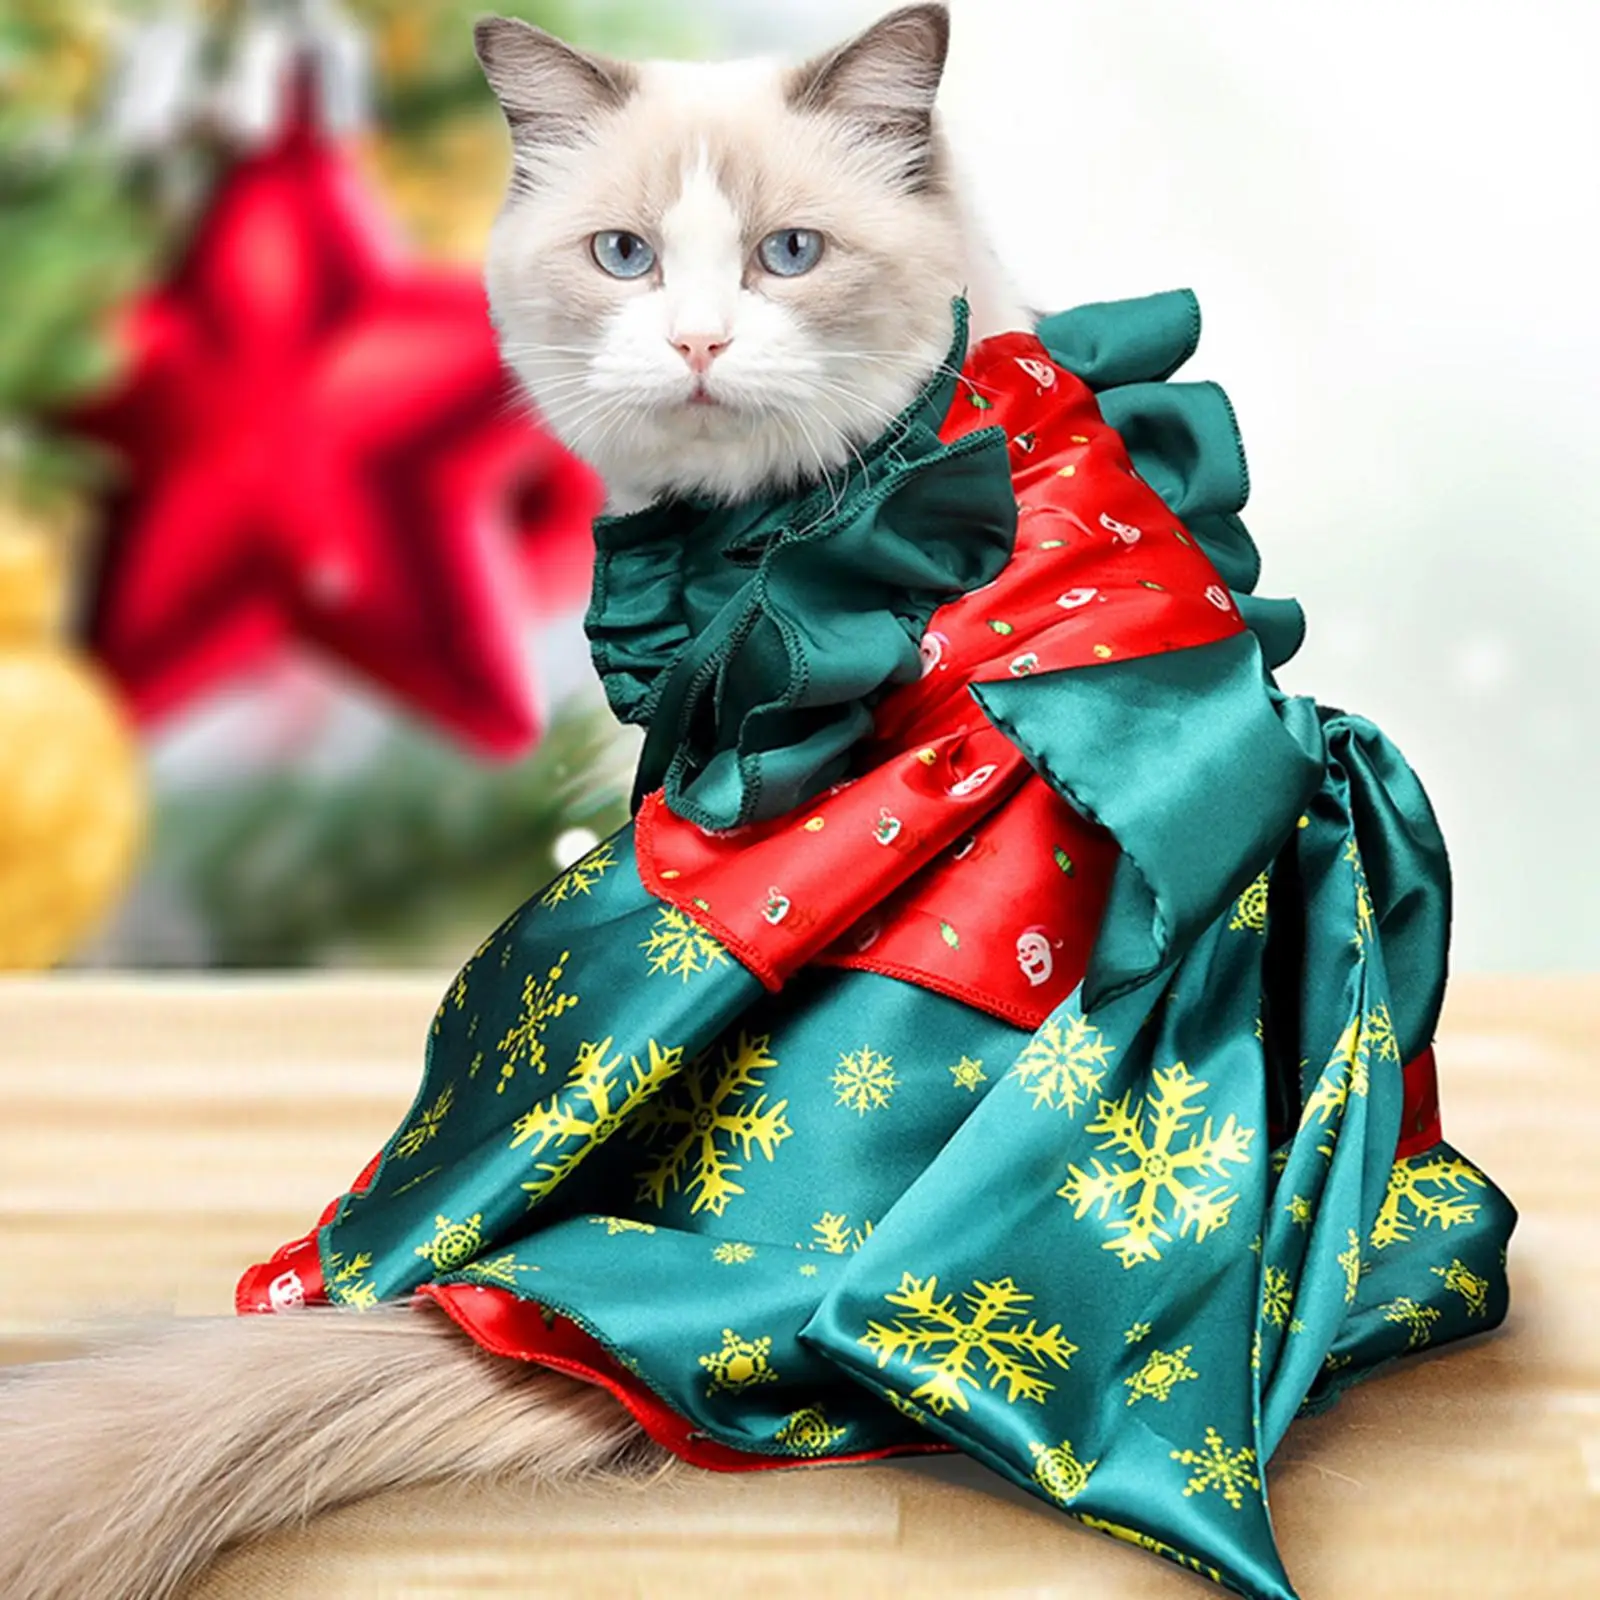 Dog Cat Christmas Costume Party Cosplay Dress Holiday Decoration Xmas Apparel Clothes Xmas Tree Costume Dress for Cats Dogs